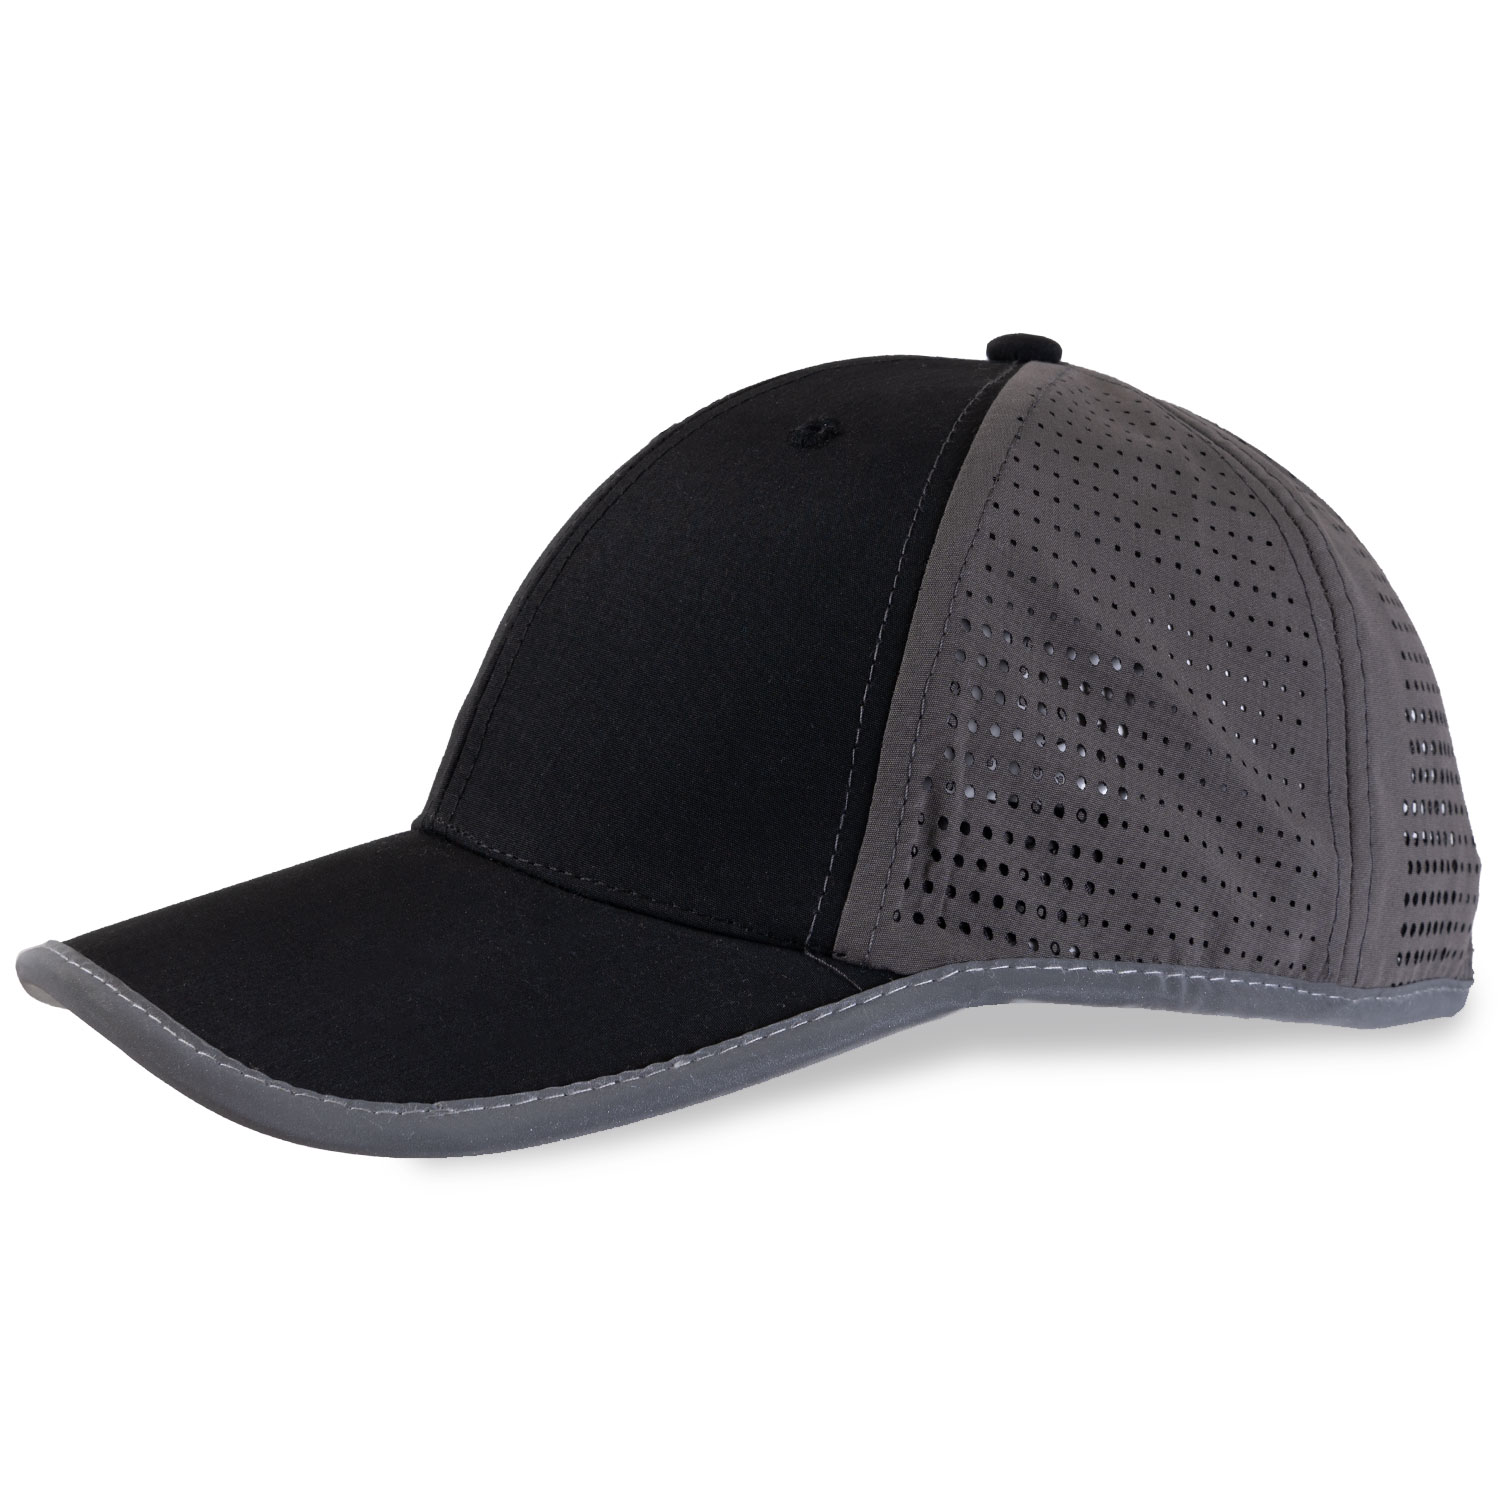 Quick drying running cap with perforations and reflective binding